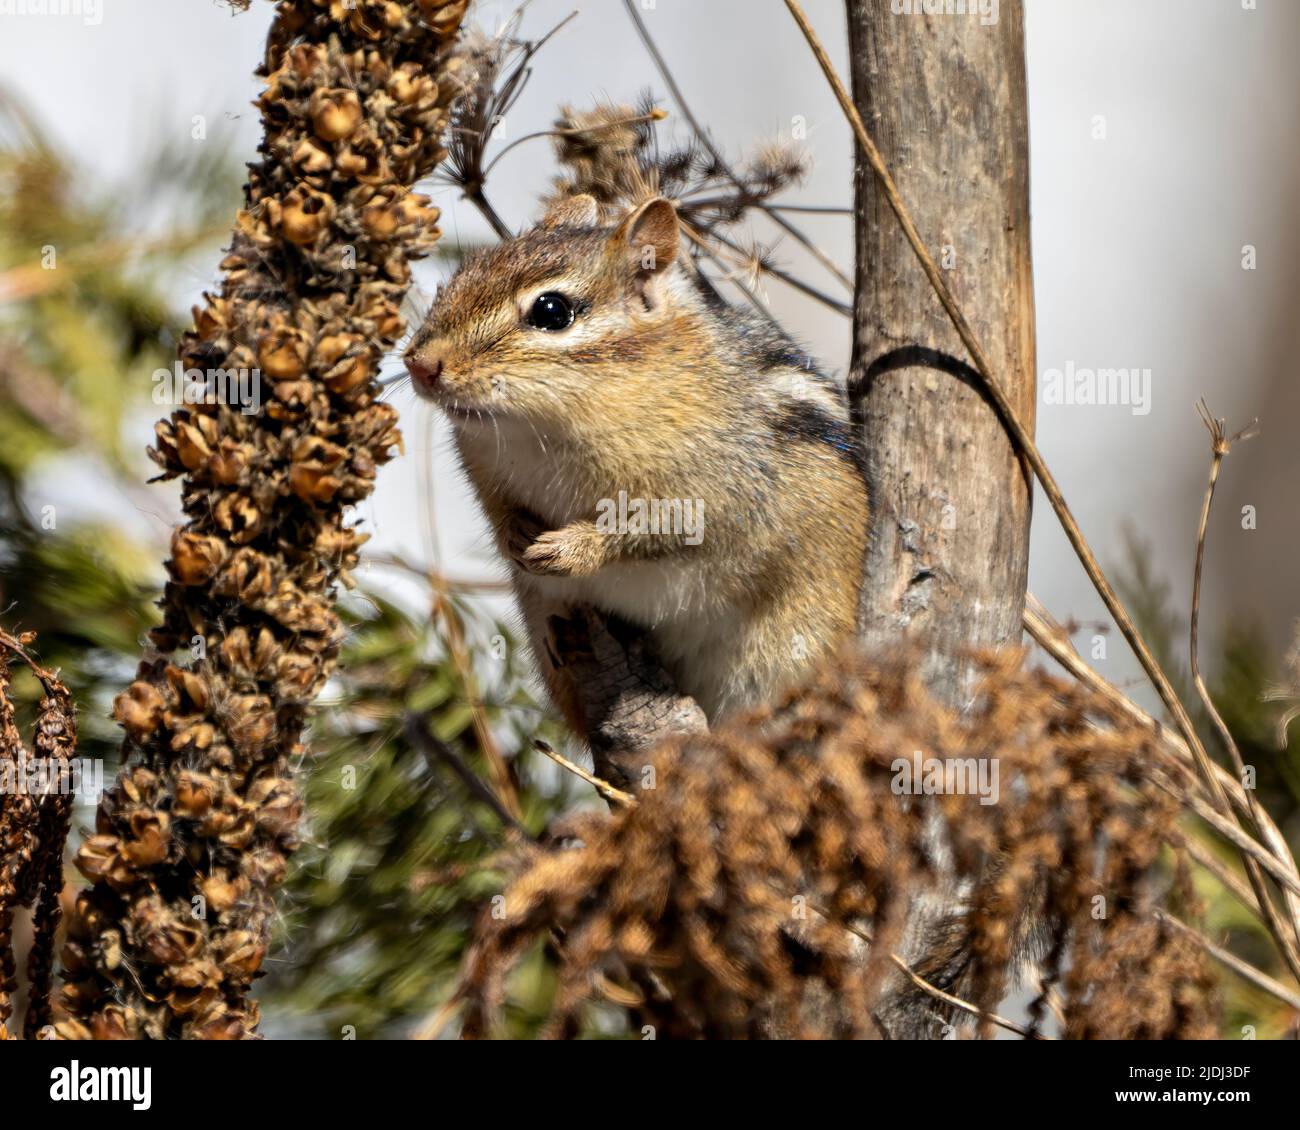 Chipmunk sitting on foliage and  displaying brown fur, body, head, eye, nose, ears, paws, in its environment and habitat with a forest background. Stock Photo